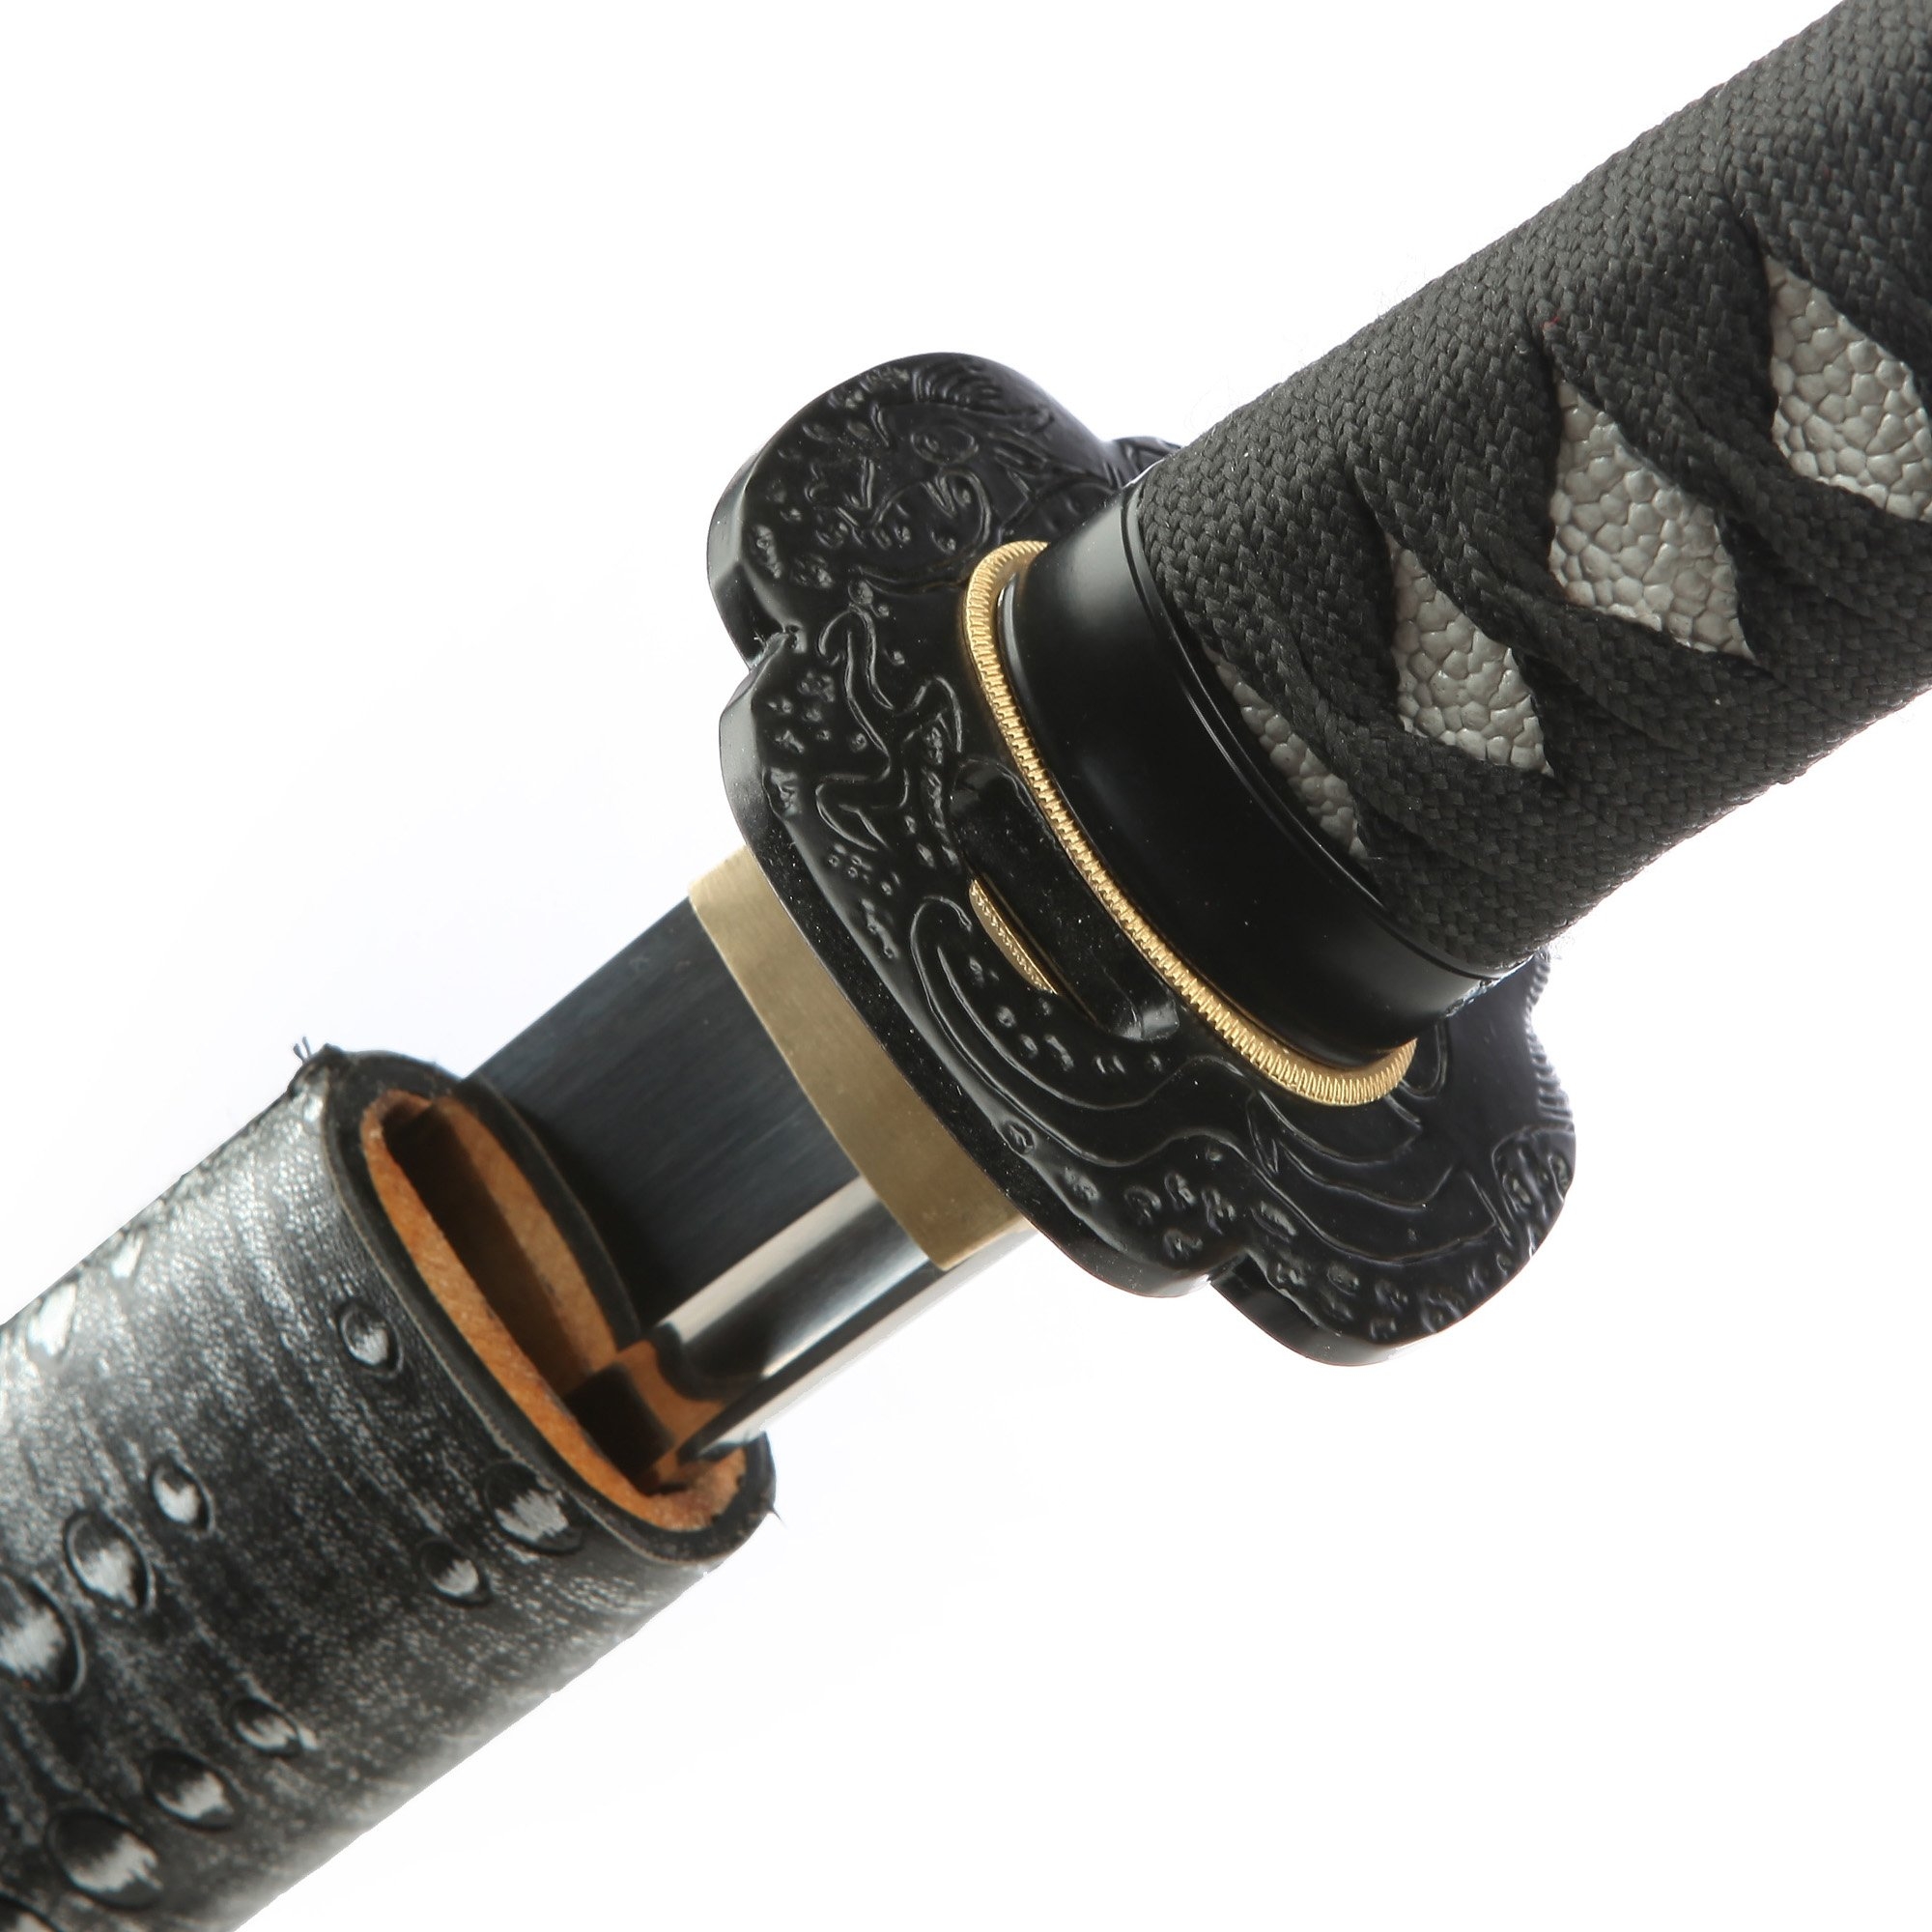 Atomic Samurai Sword of Kamikazwe in Just $88 (Japanese Steel is also  Available) from One Punch Man Swords | Japanese Samurai Sword